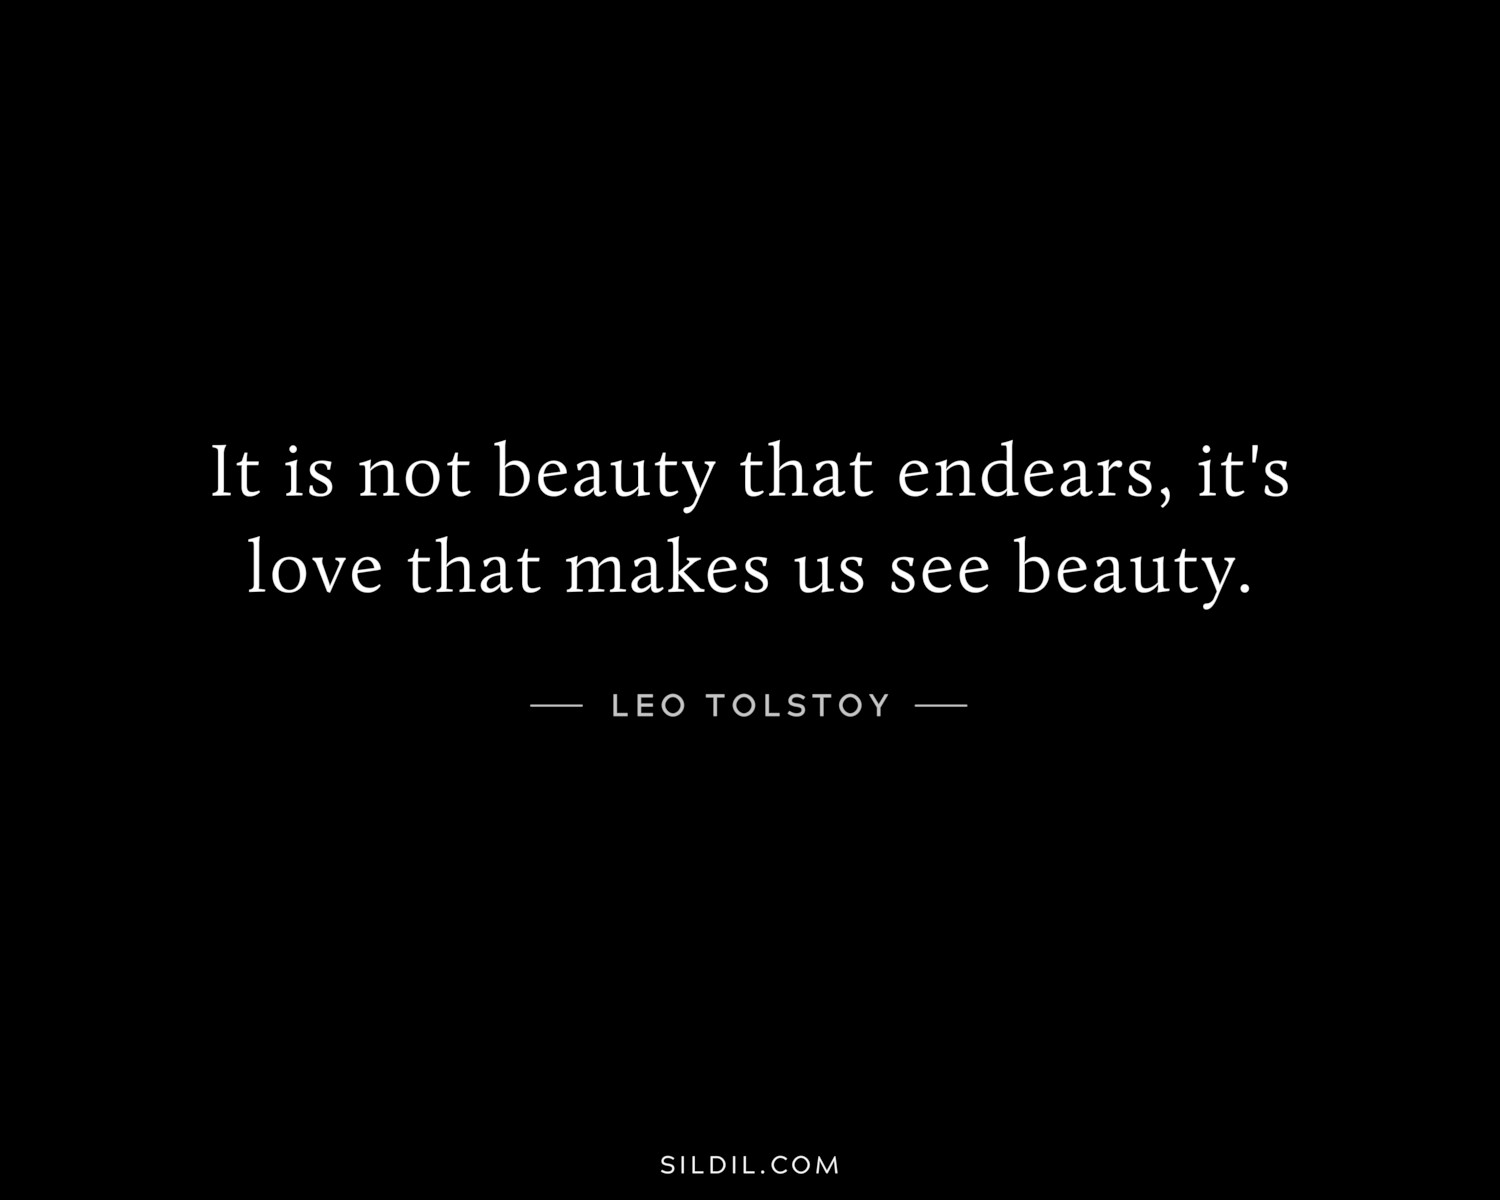 It is not beauty that endears, it's love that makes us see beauty.